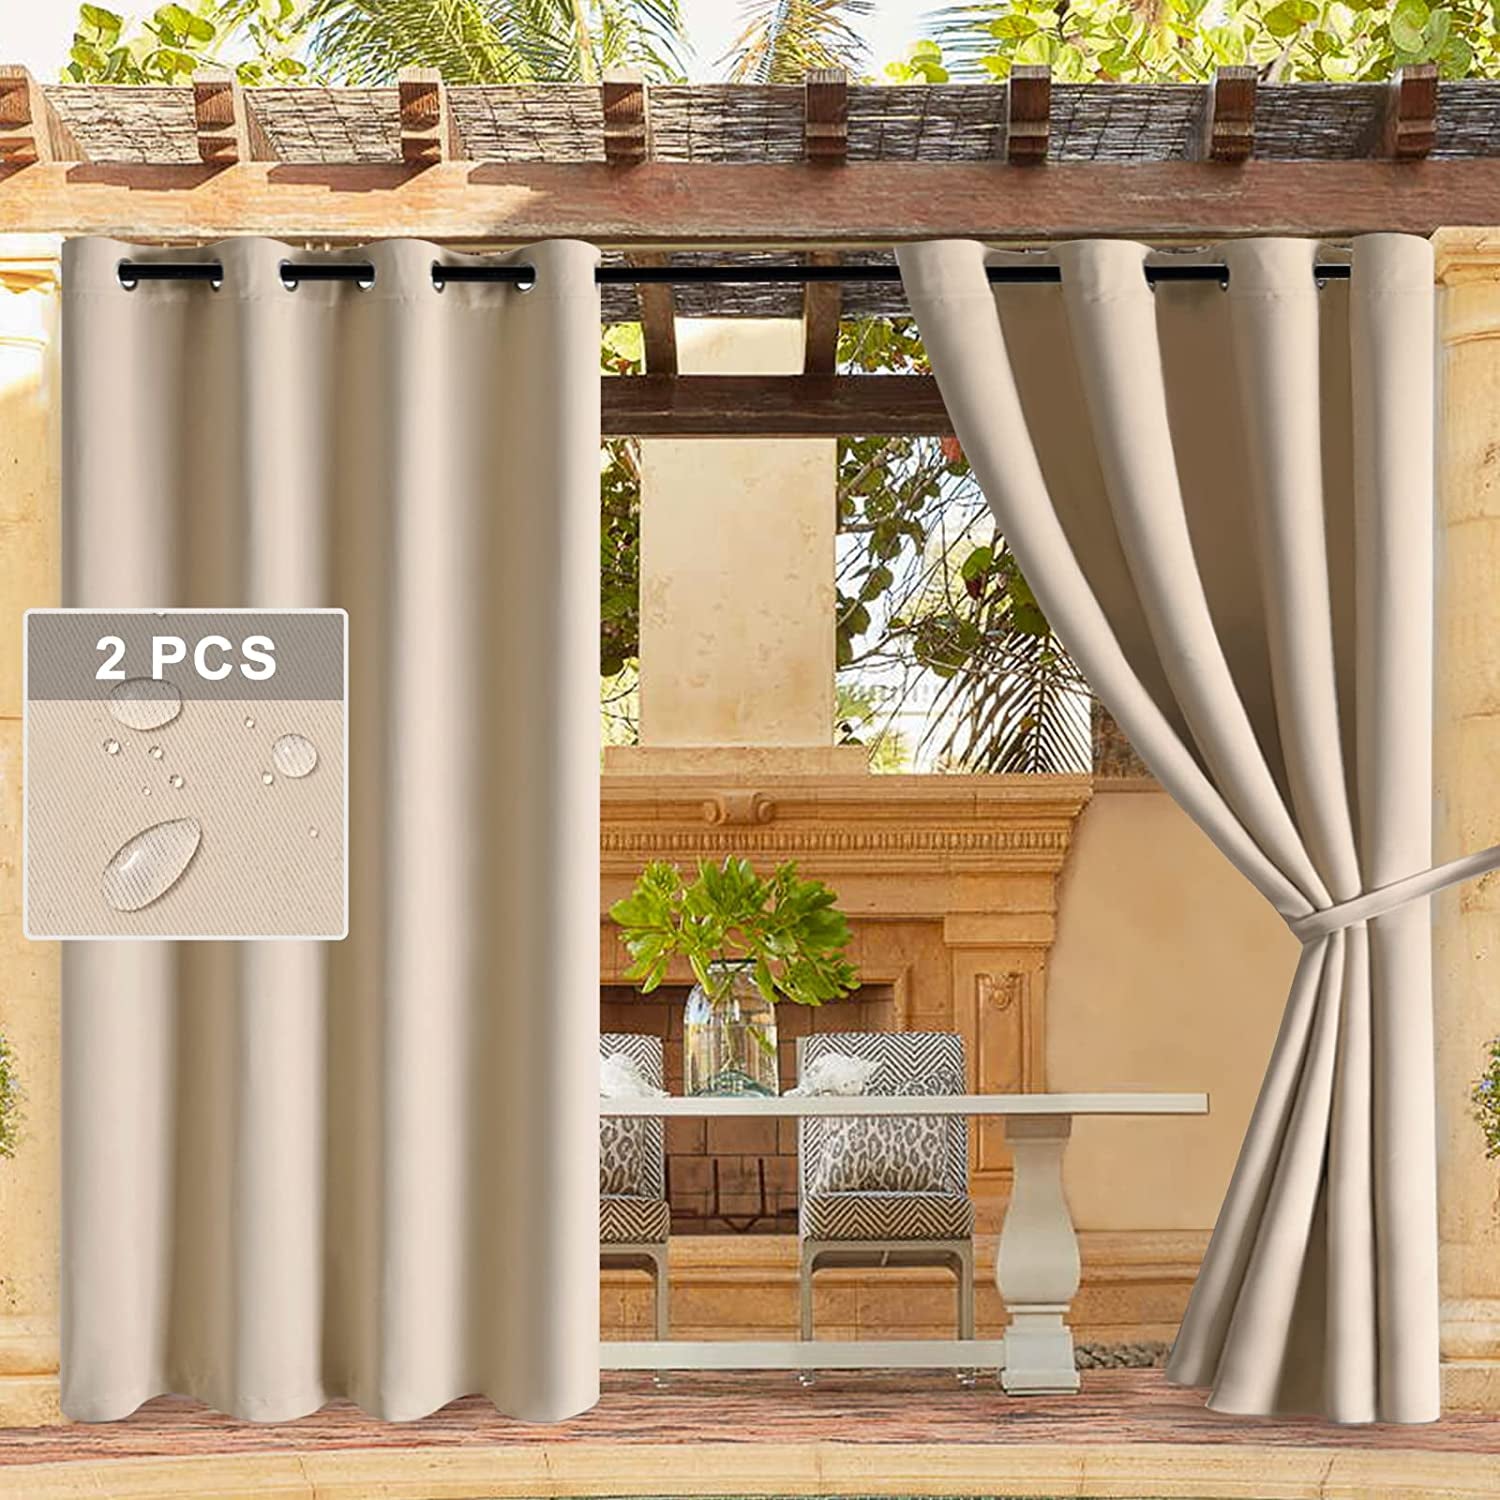 DWCN, DWCN Waterproof Outdoor Curtains for Patio -Indoor Outdoor Thermal Insulated, Sun Blocking Grommet Blackout Curtains for Bedroom, Pergola, Porch and Cabana, White, 52 X 108 Inches Long, 2 Panels